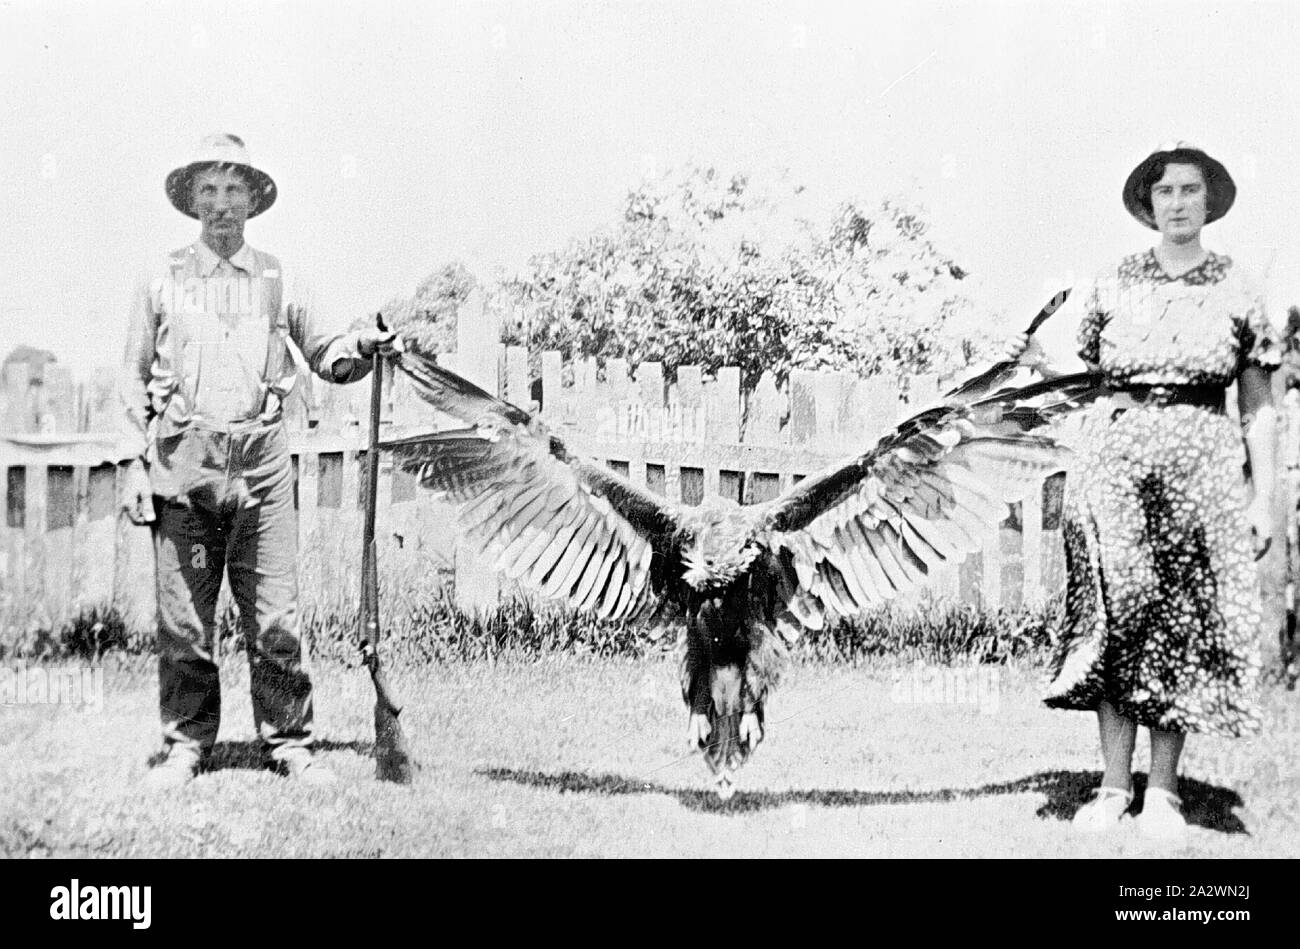 Negative - Man & Woman Holding a Dead Eagle by Its Outspread Wings, Apsley, Victoria, 1937, A man and woman holding a dead eagle by its outspread wings. The man also holds a rifle Stock Photo